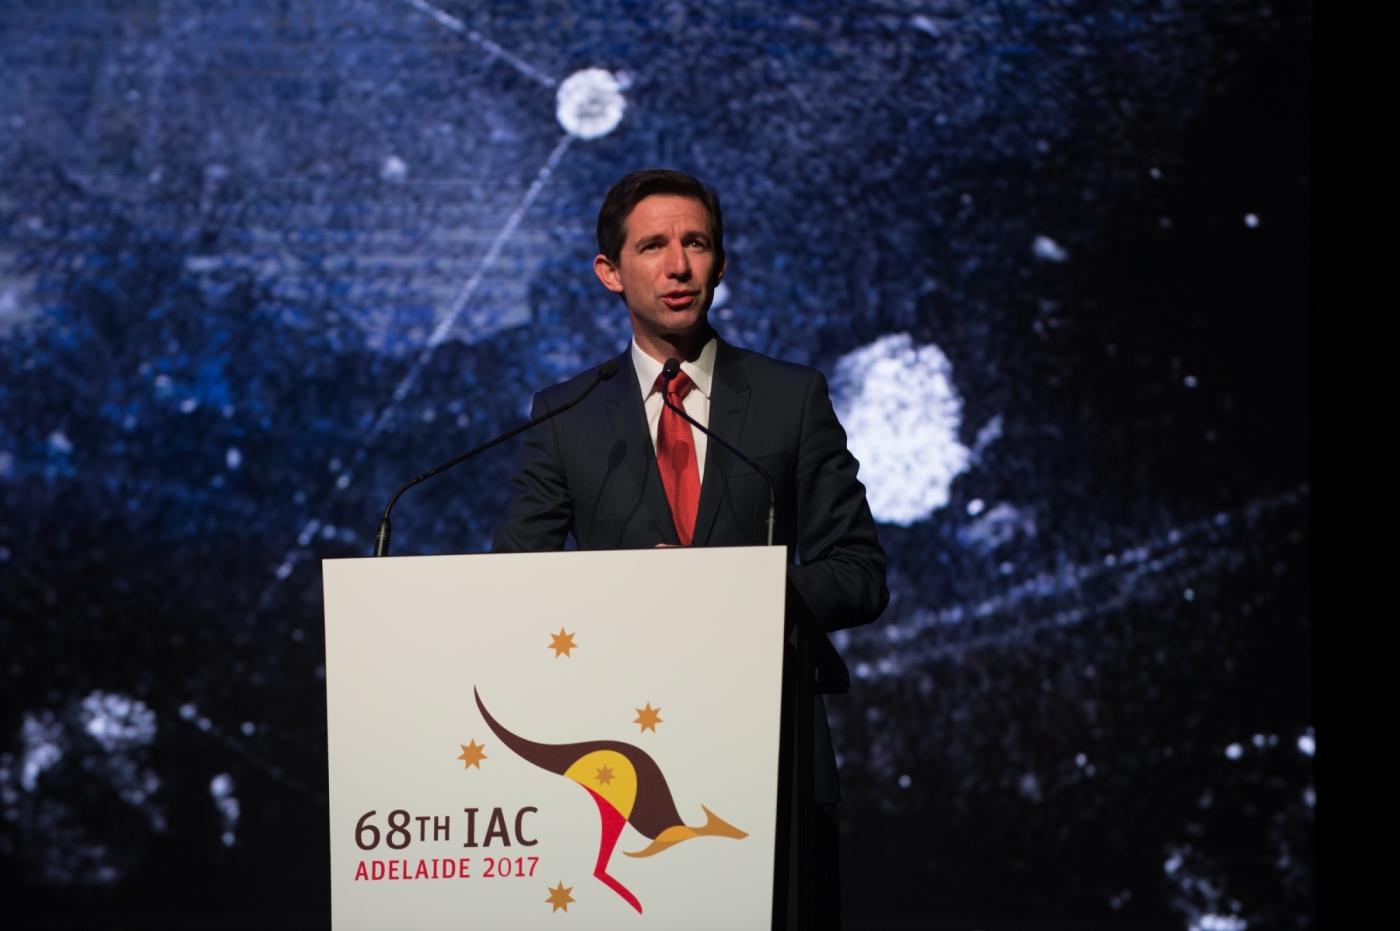 ADELAIDE, Sept. 25, 2017 (Xinhua) -- Australian Minister for Education and Training Simon Birmingham speaks during the opening ceremony of the 68th International Astronautical Congress (IAC) in Adelaide, Australia, Sept. 25, 2017. The 68th IAC, a five-day conference devoted to discussing innovation and advances in the space industry, began in Adelaide on Monday. The IAC is the world's largest annual gathering of space professionals and its parent organization is the International Astronautical Federation (IAF) that is based in Paris. The International Aeronautical Congress has been held every year since 1950. (Xinhua/Xu Haijing/IANS) by .